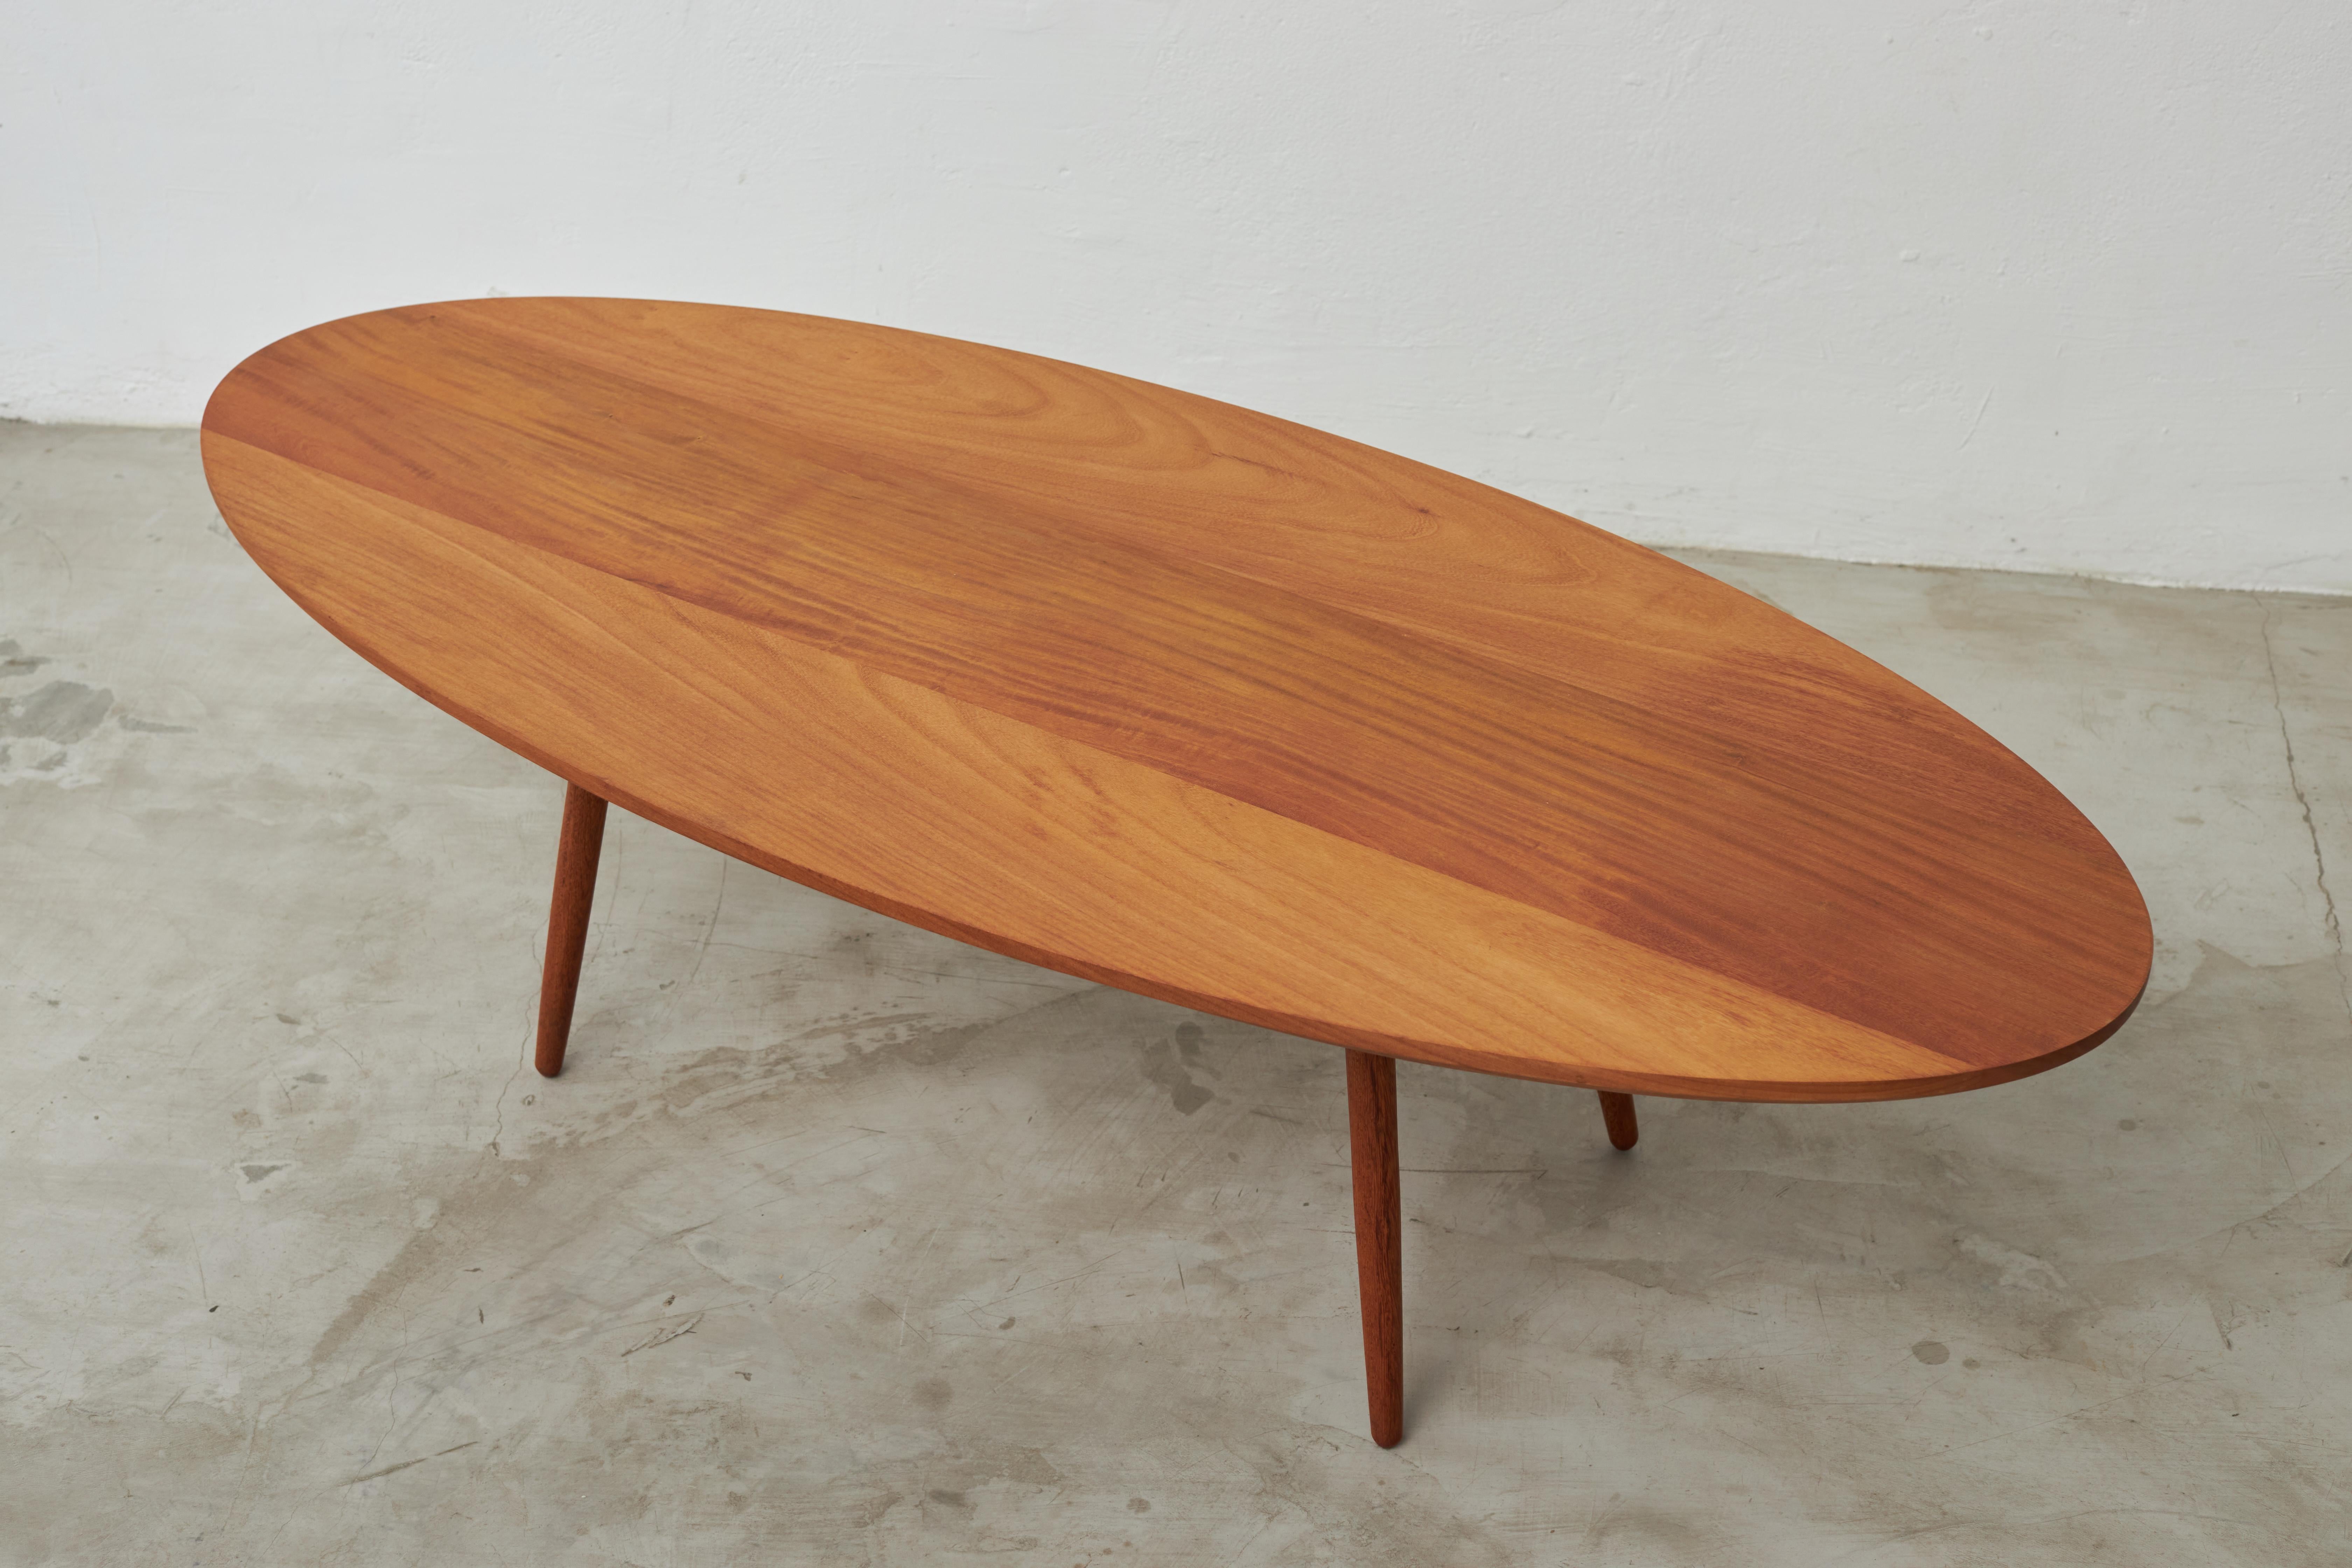 'Banquisa' Cofee Table - Brazilian design by André Bianco For Sale 1